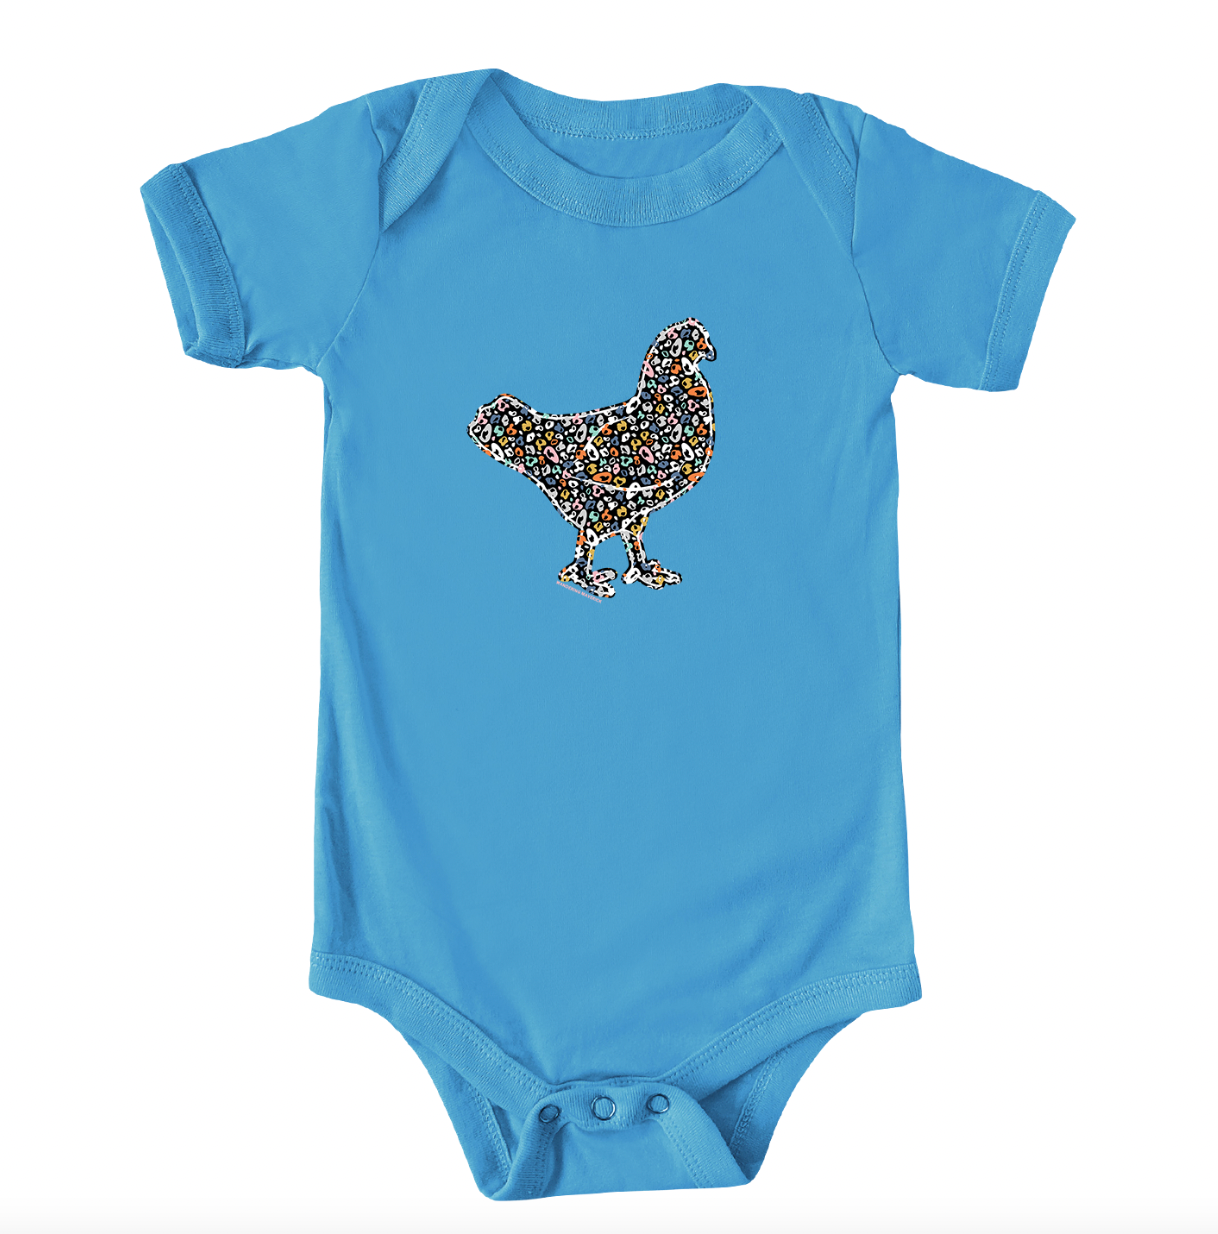 Colorful Cheetah Chicken One Piece/T-Shirt (Newborn - Youth XL) - Multiple Colors!